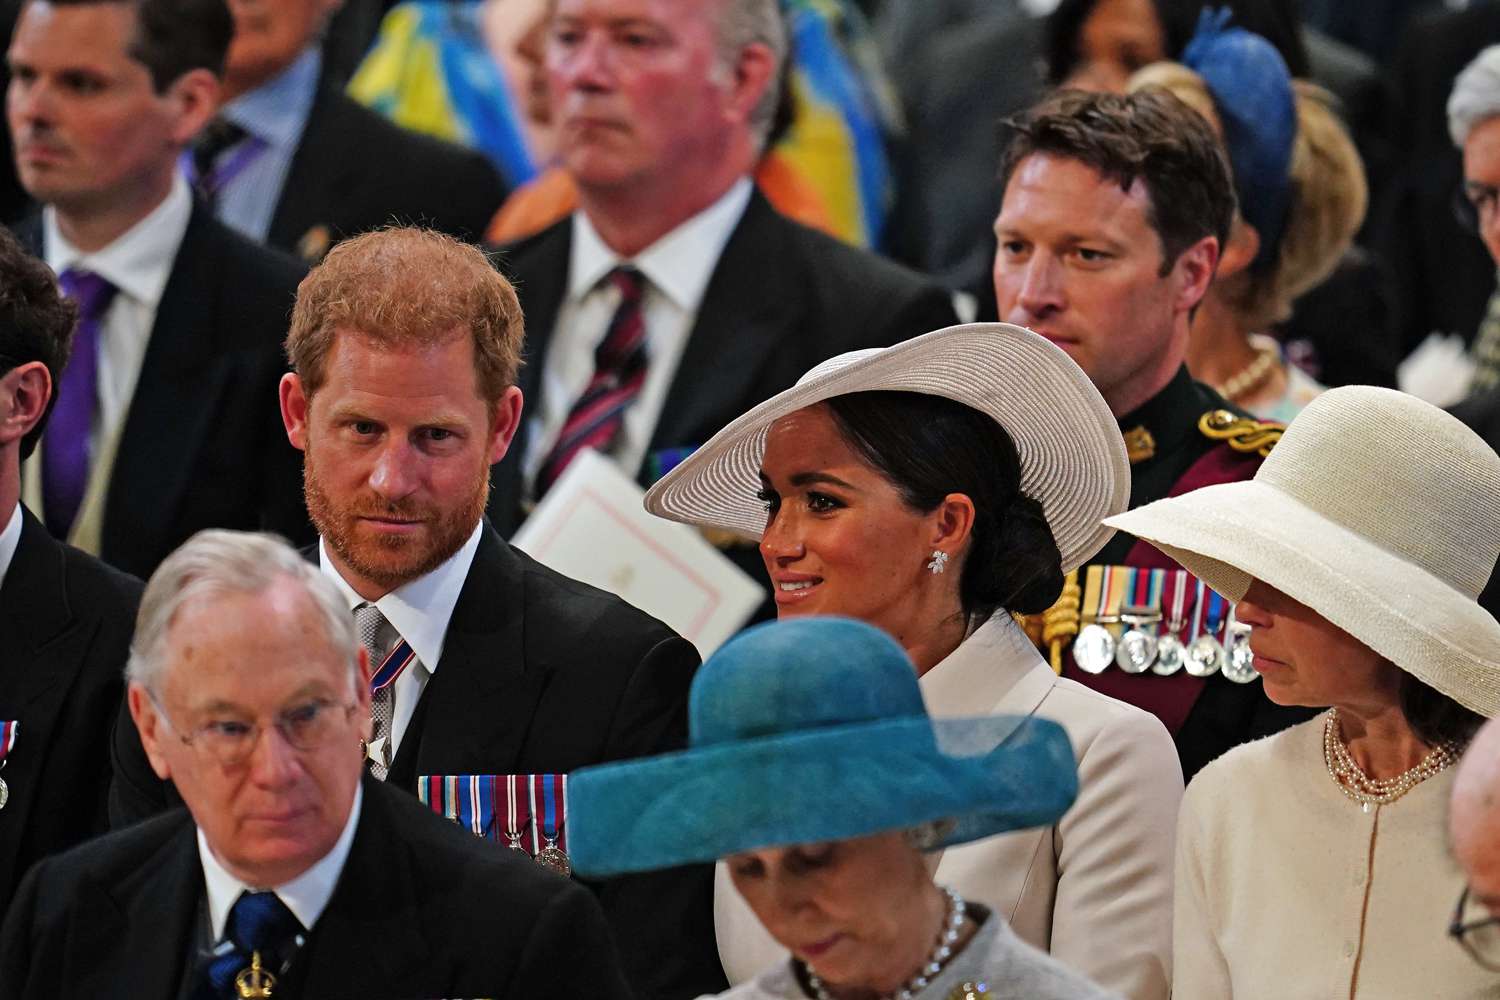 The Duke and Duchess of Sussex and Lady Sarah Chatto during the National Service of Thanksgiving at St Paul's Cathedral, 런던, on day two of the Platinum Jubilee celebrations for Queen Elizabeth II. 사진 데이트: Friday June 3, 2022.